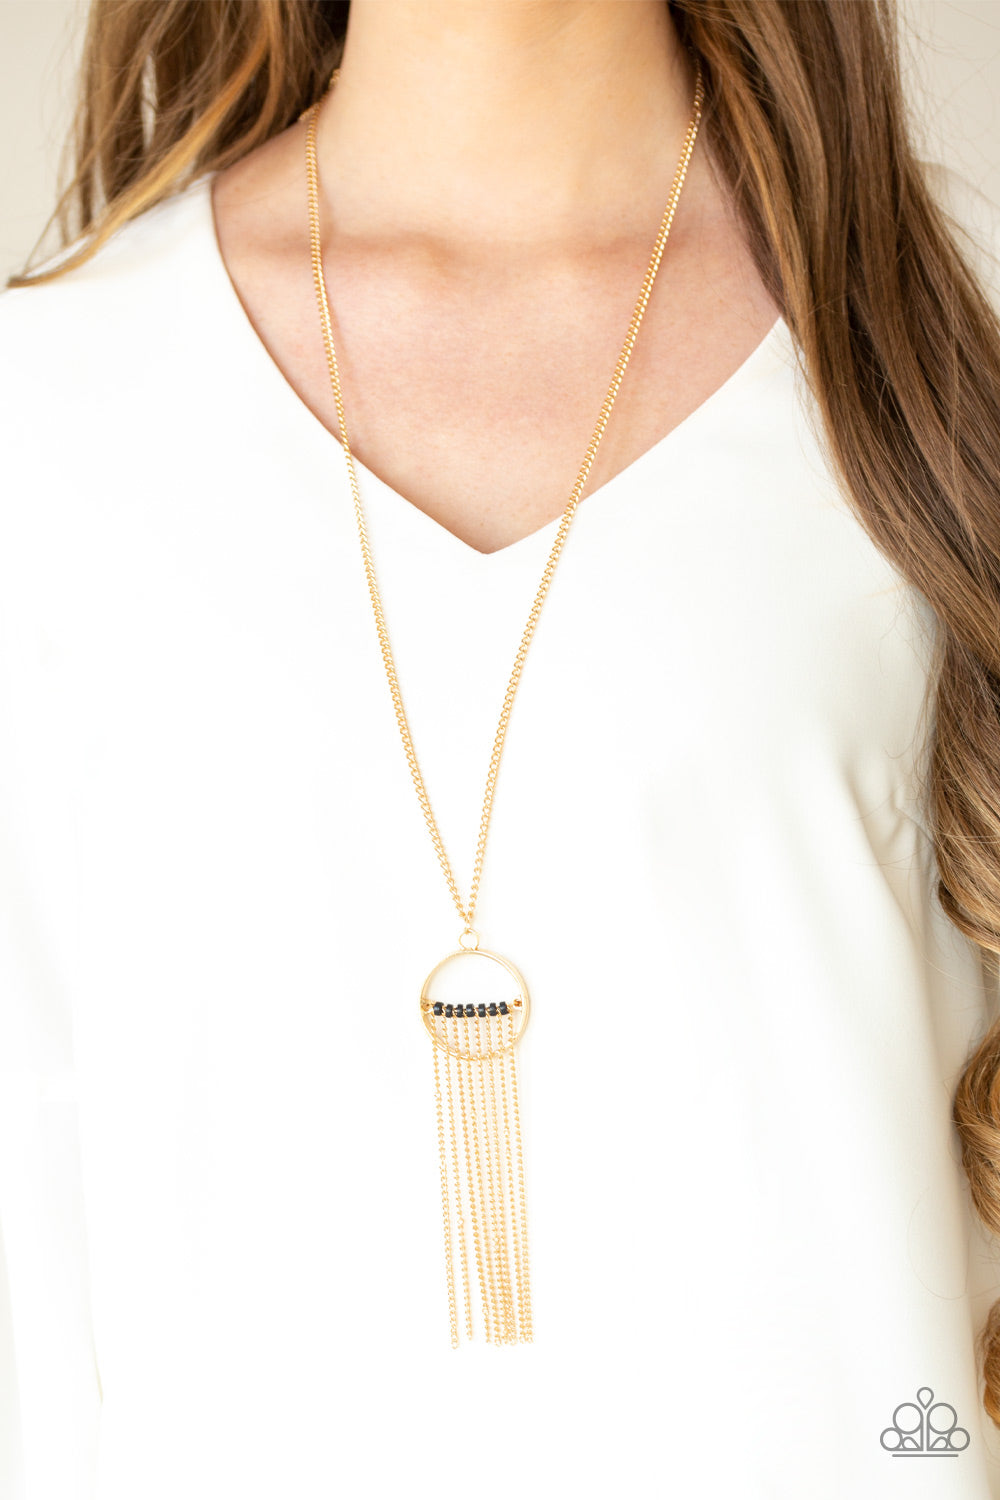 Terra Tassel- Black and Gold Necklace- Paparazzi Accessories